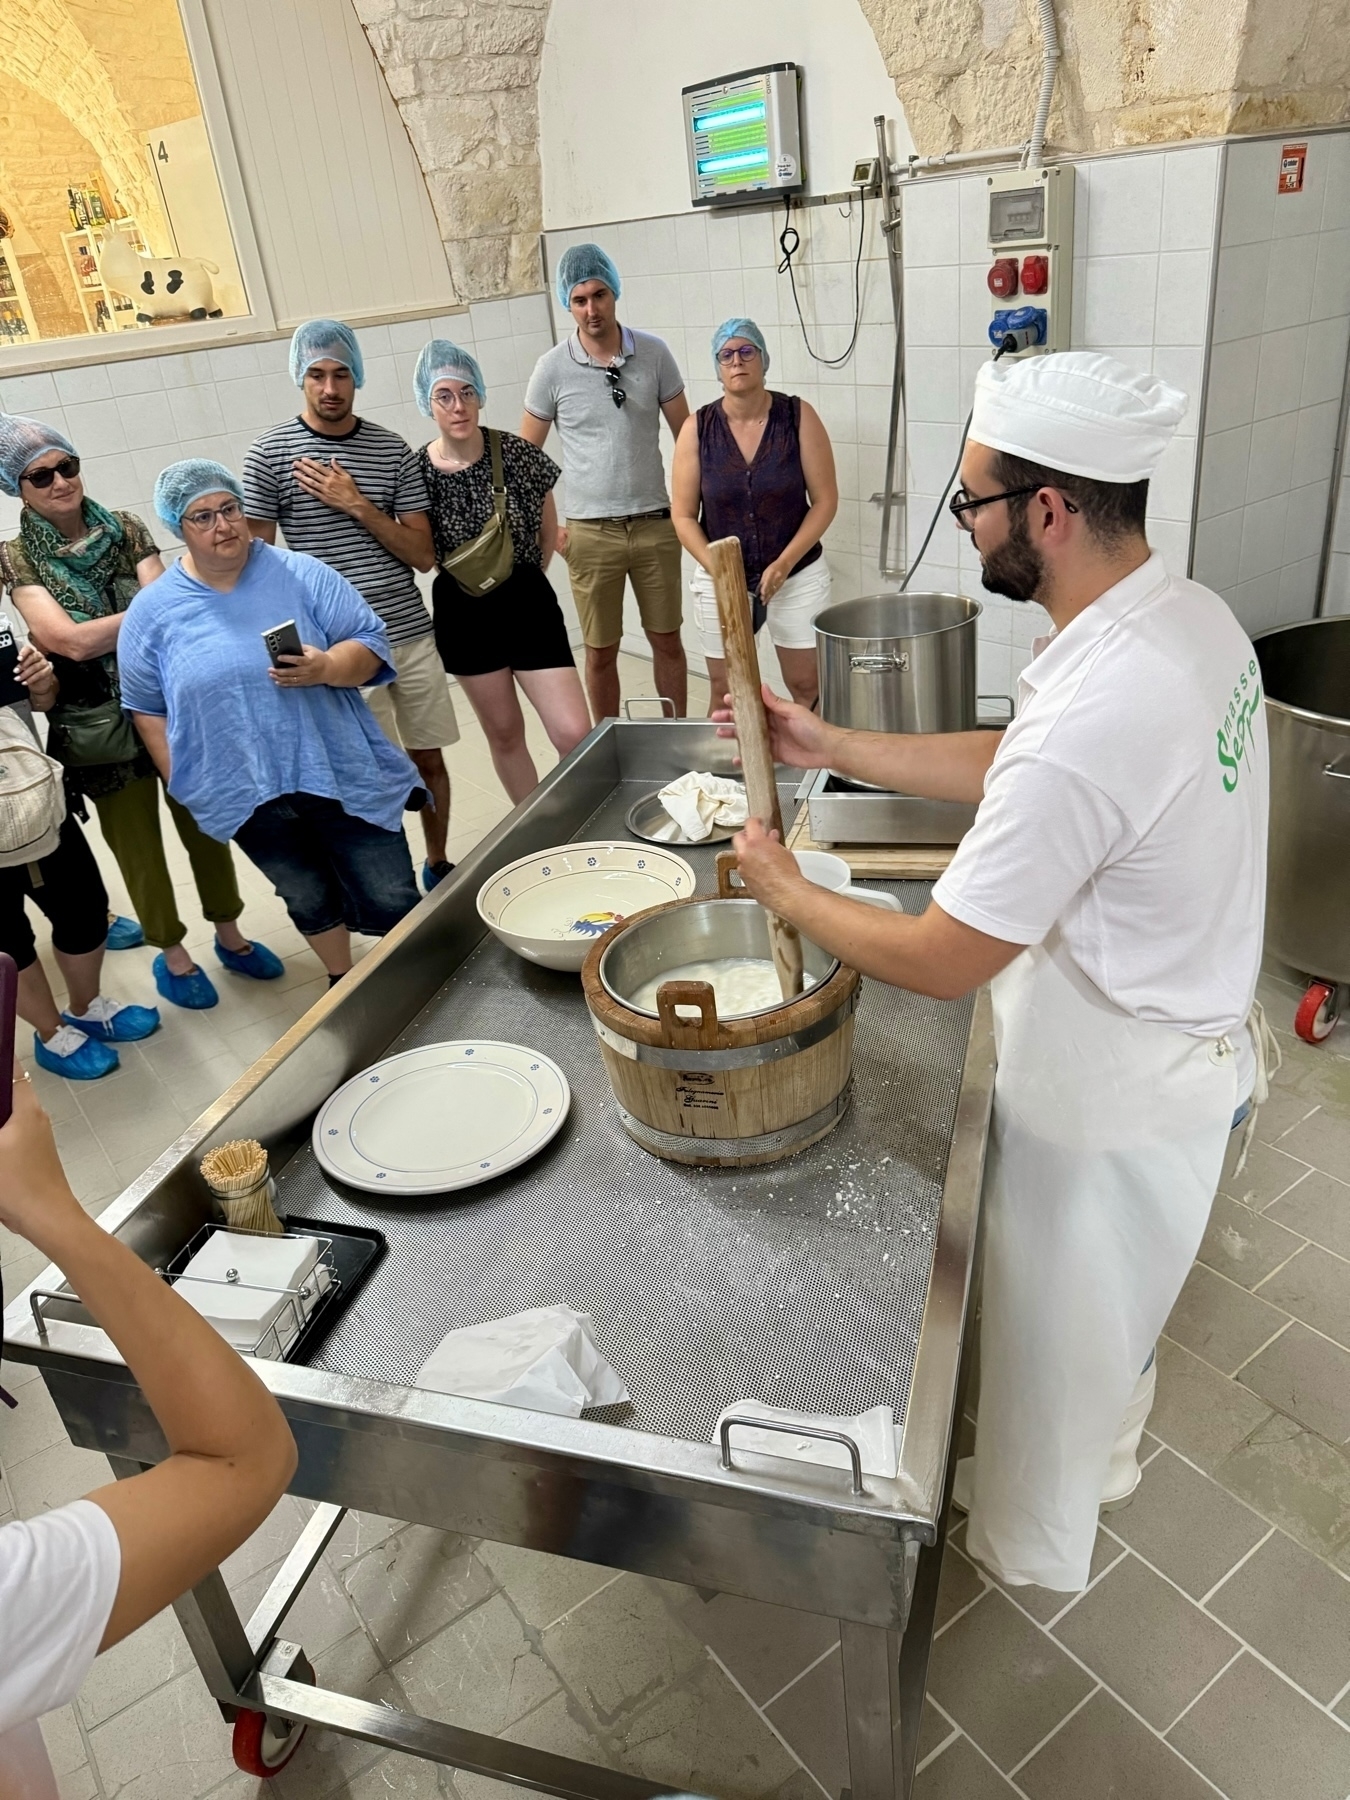 A group of people wearing hairnets and protective shoe covers are observing a cheesemaker demonstrate cheese-making. The cheesemaker, wearing a white uniform and hat, is stirring curds in a wooden bucket on a metal table.